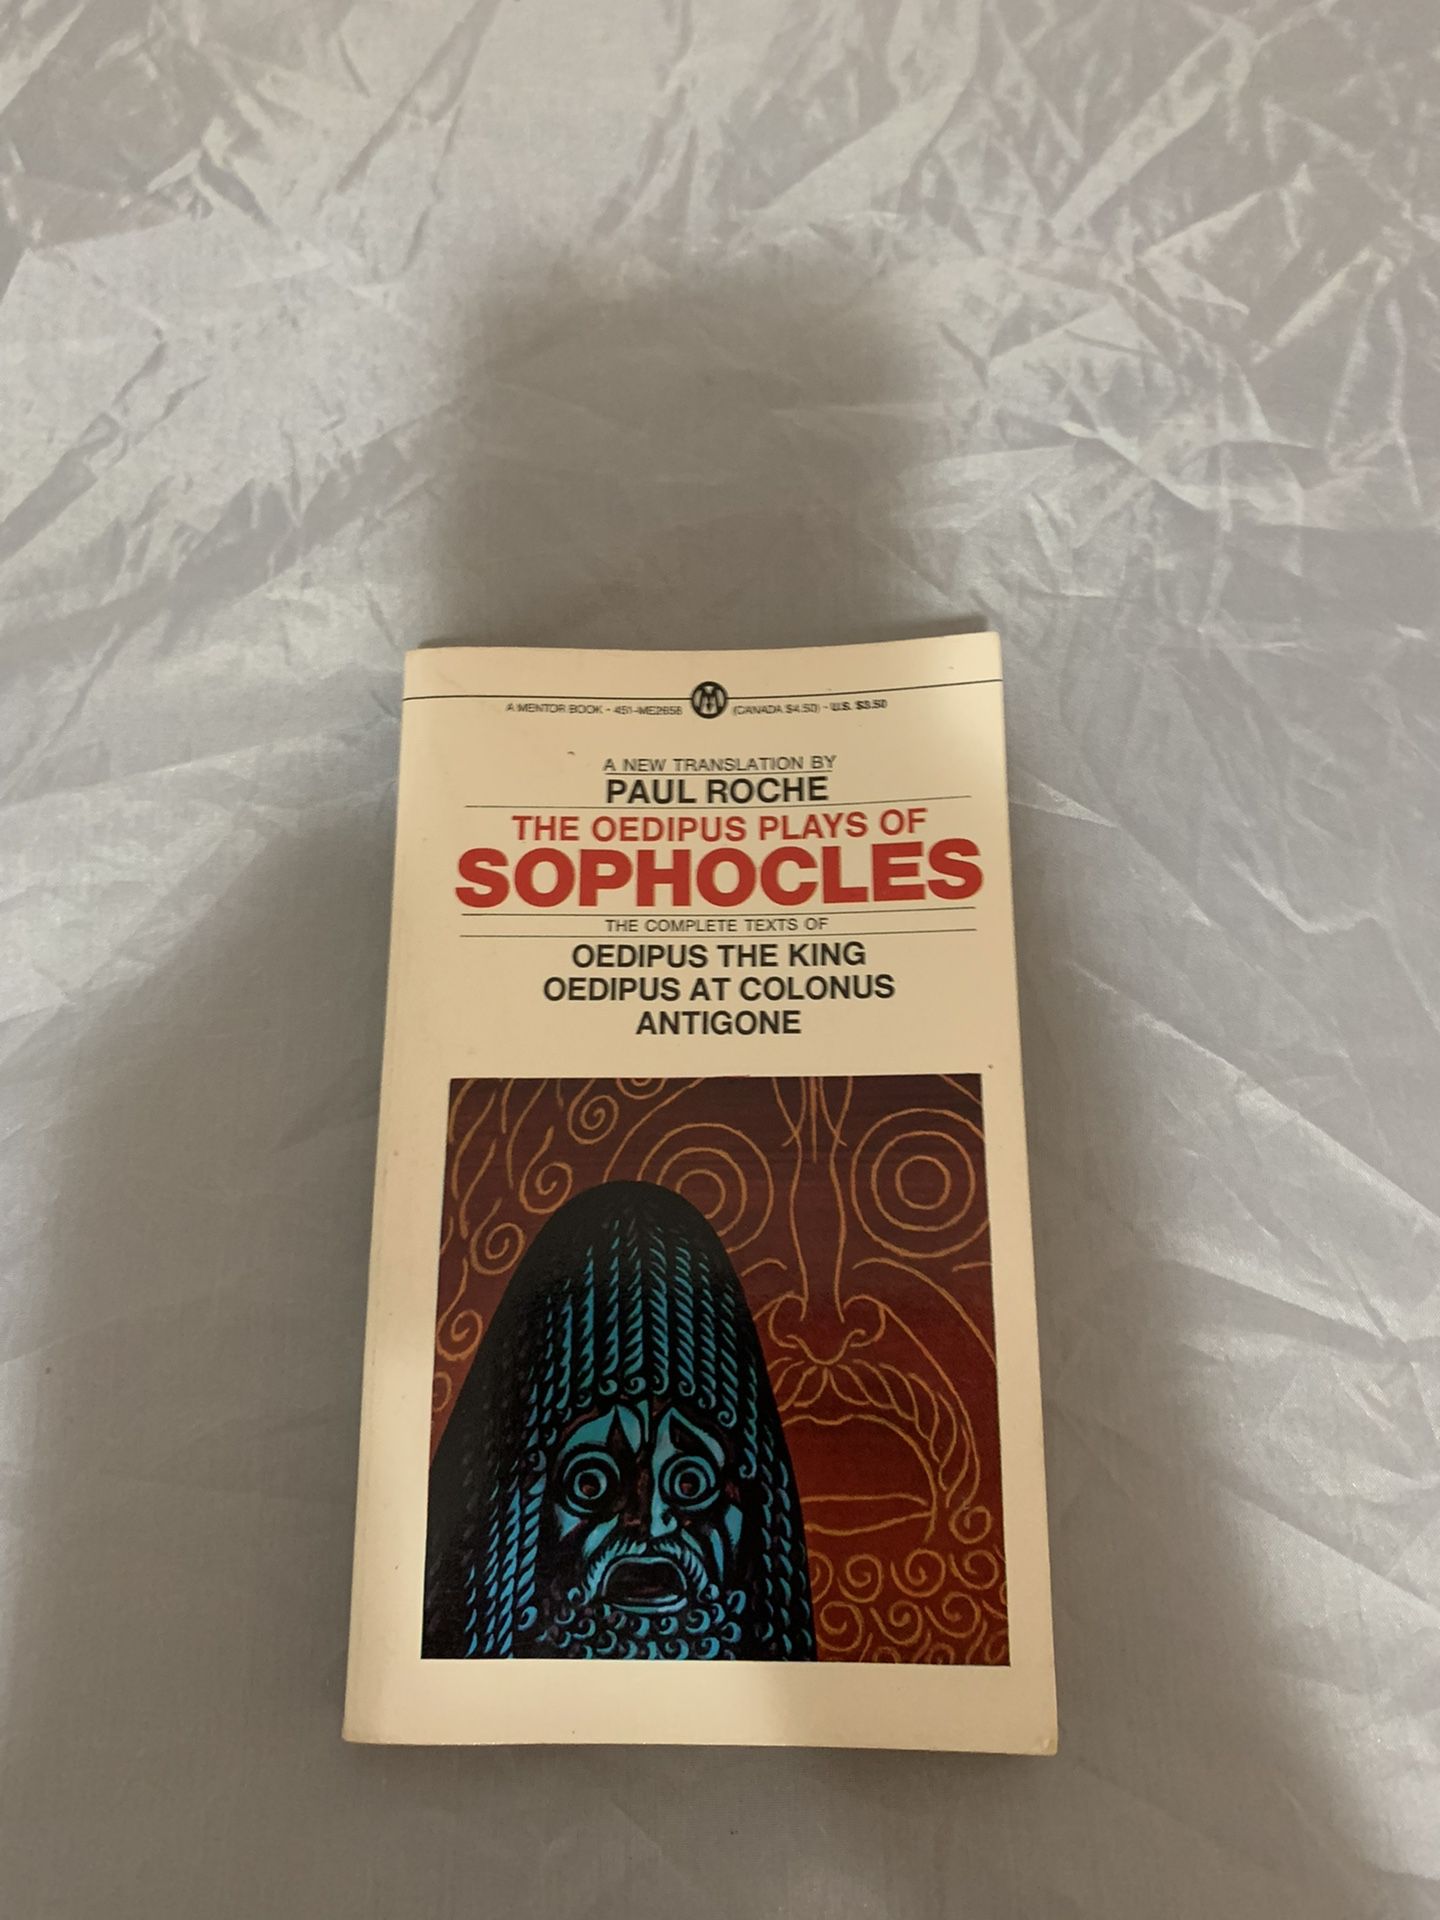 the oedipus plays of sophocles paul roche 0(contact info removed)83 book